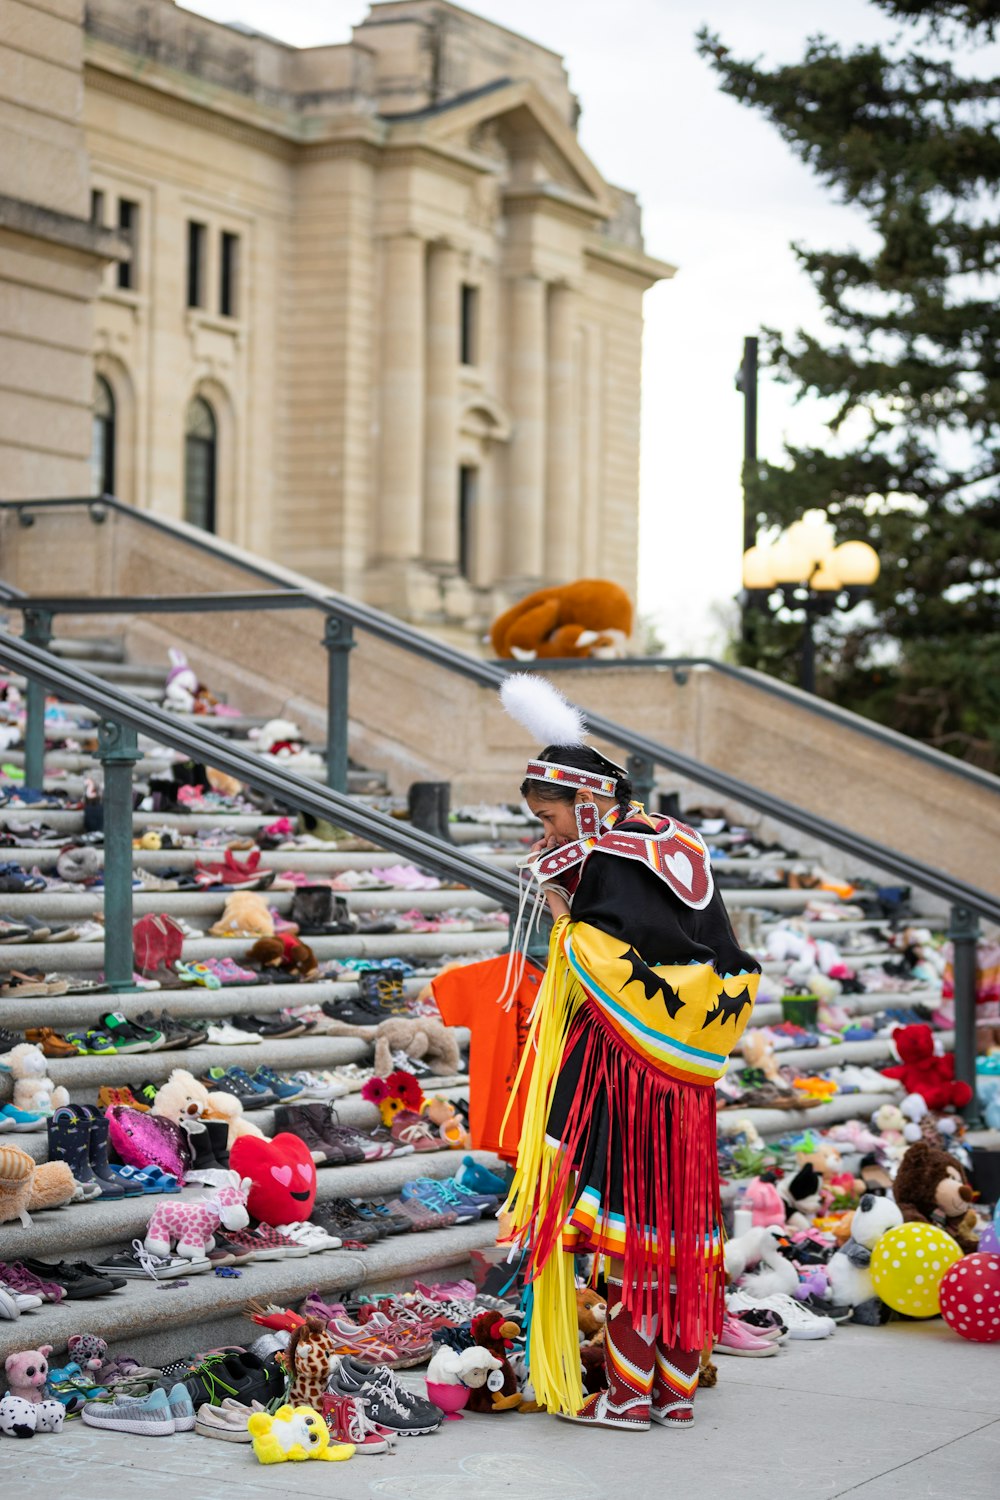 a man dressed in a costume standing next to a bunch of stuffed animals